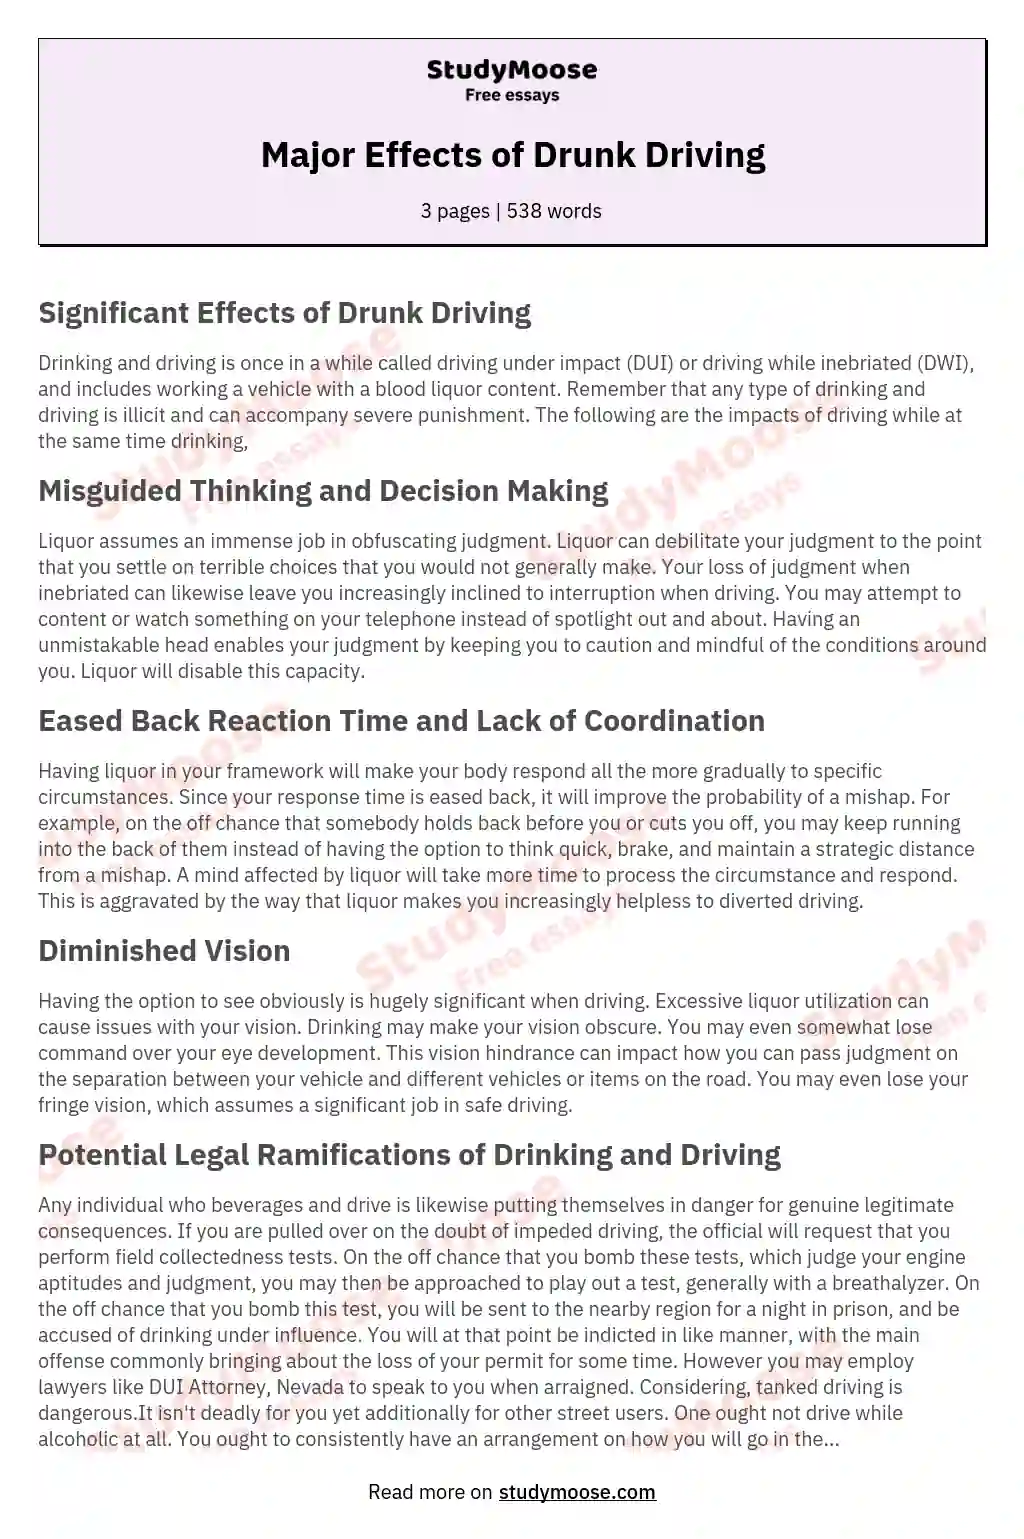 Major Effects of Drunk Driving essay